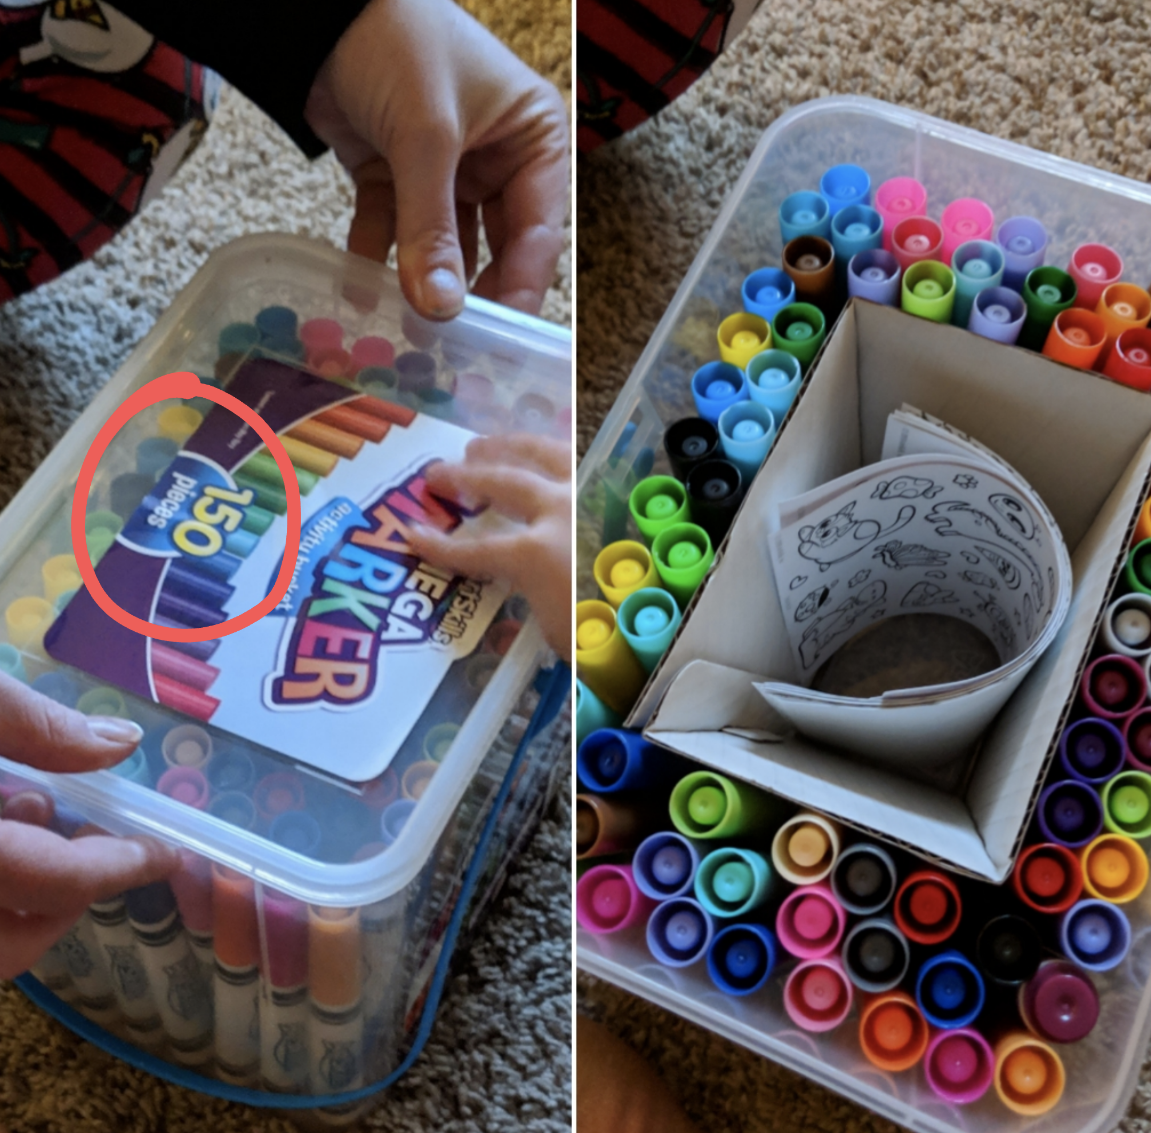 A marker container that should contain &quot;150 pieces&quot; has an empty section in the center where the label was, so fewer markers and other things, like stickers, instead